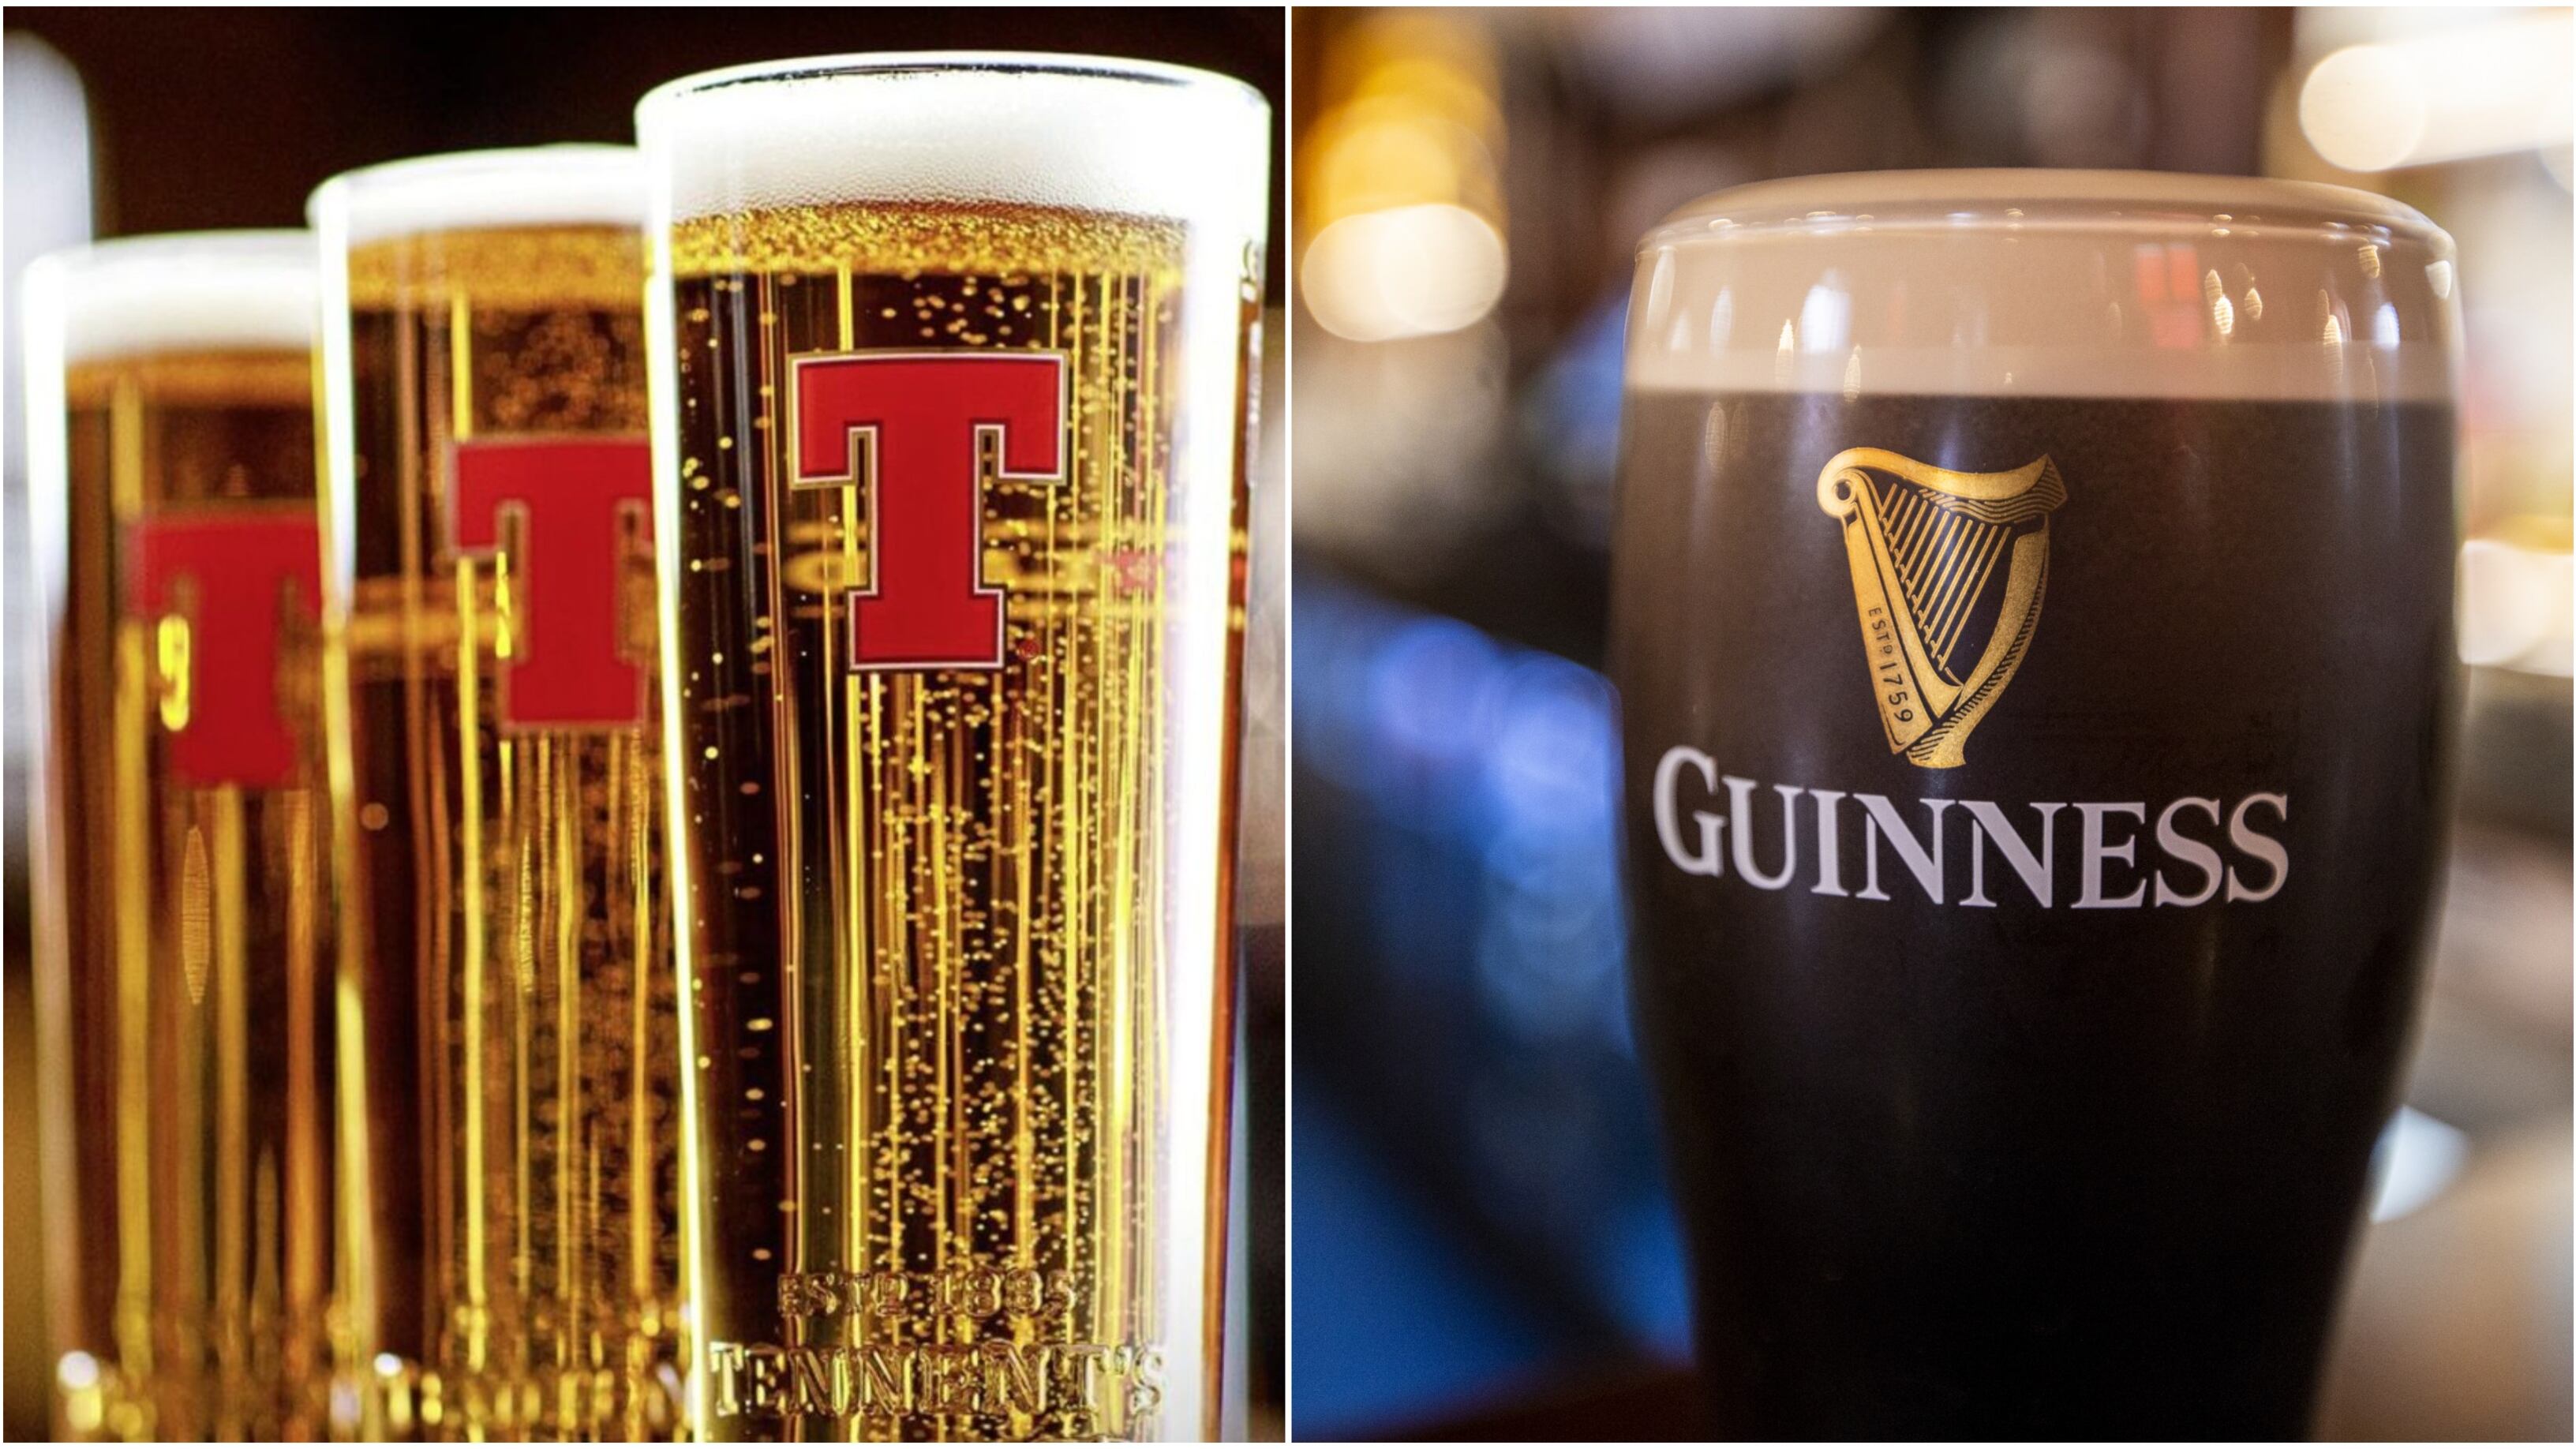 Split image showing pints of Tennent's on the left and a full pint of Guinness on the right.